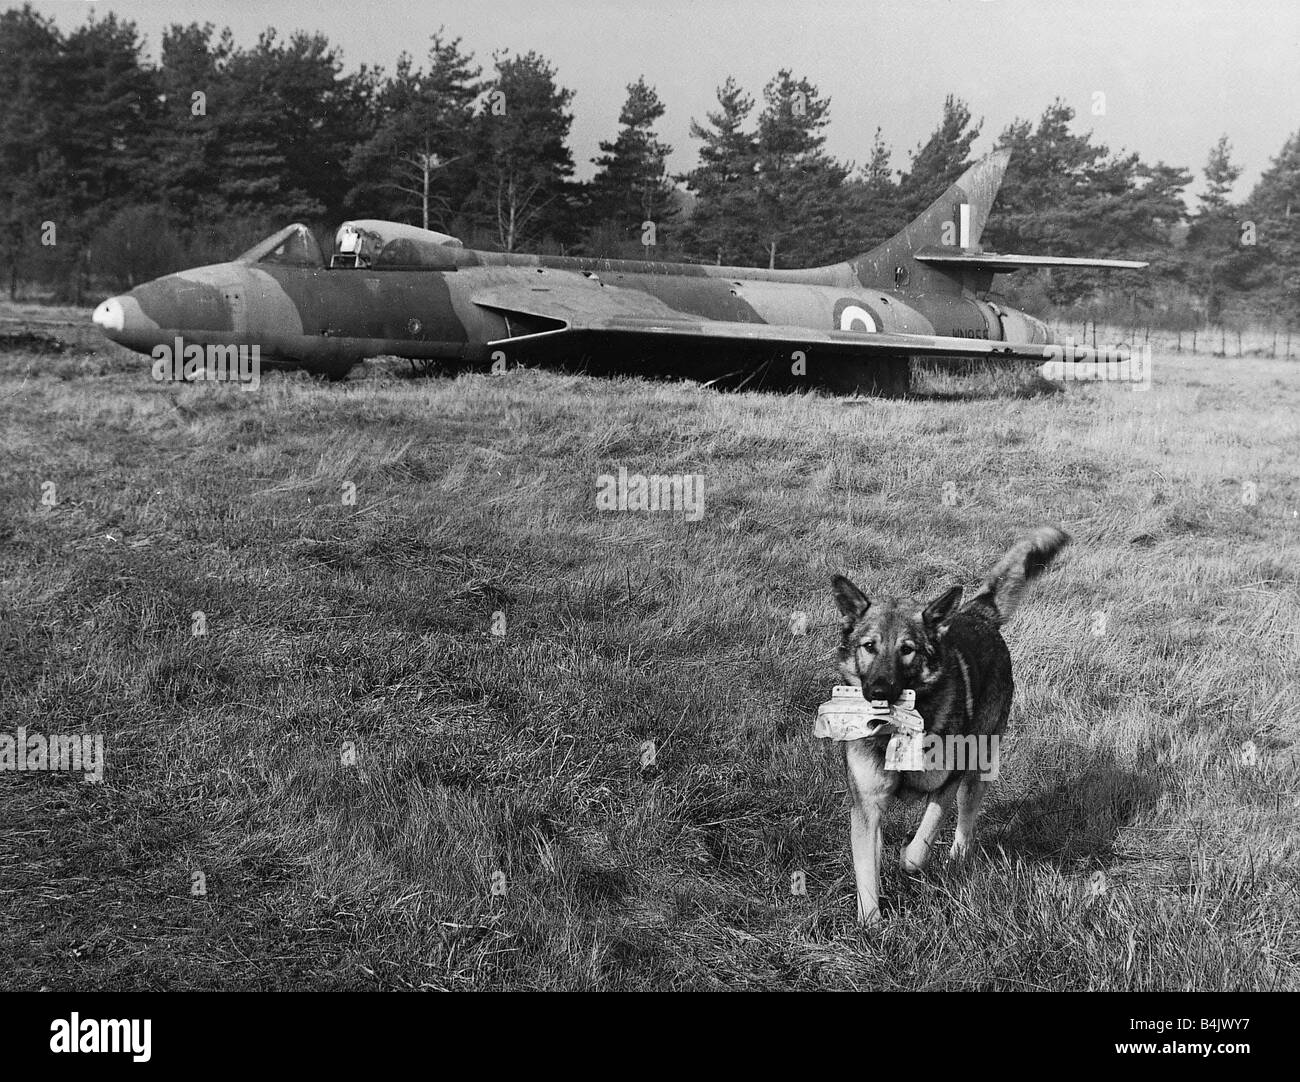 Dogs Alsation Ministry of Aviation February 1964 A crashed plane lies in a tree lined field and Rusty the Alsation is there to help find out why it crashed He s the Ministry of Aviation s air crash dog detective His job to smell out eqipment hurled from the wreckage This demonstration of his skills was staged at the Royal Aircraft Establishment at Farnborough Stock Photo